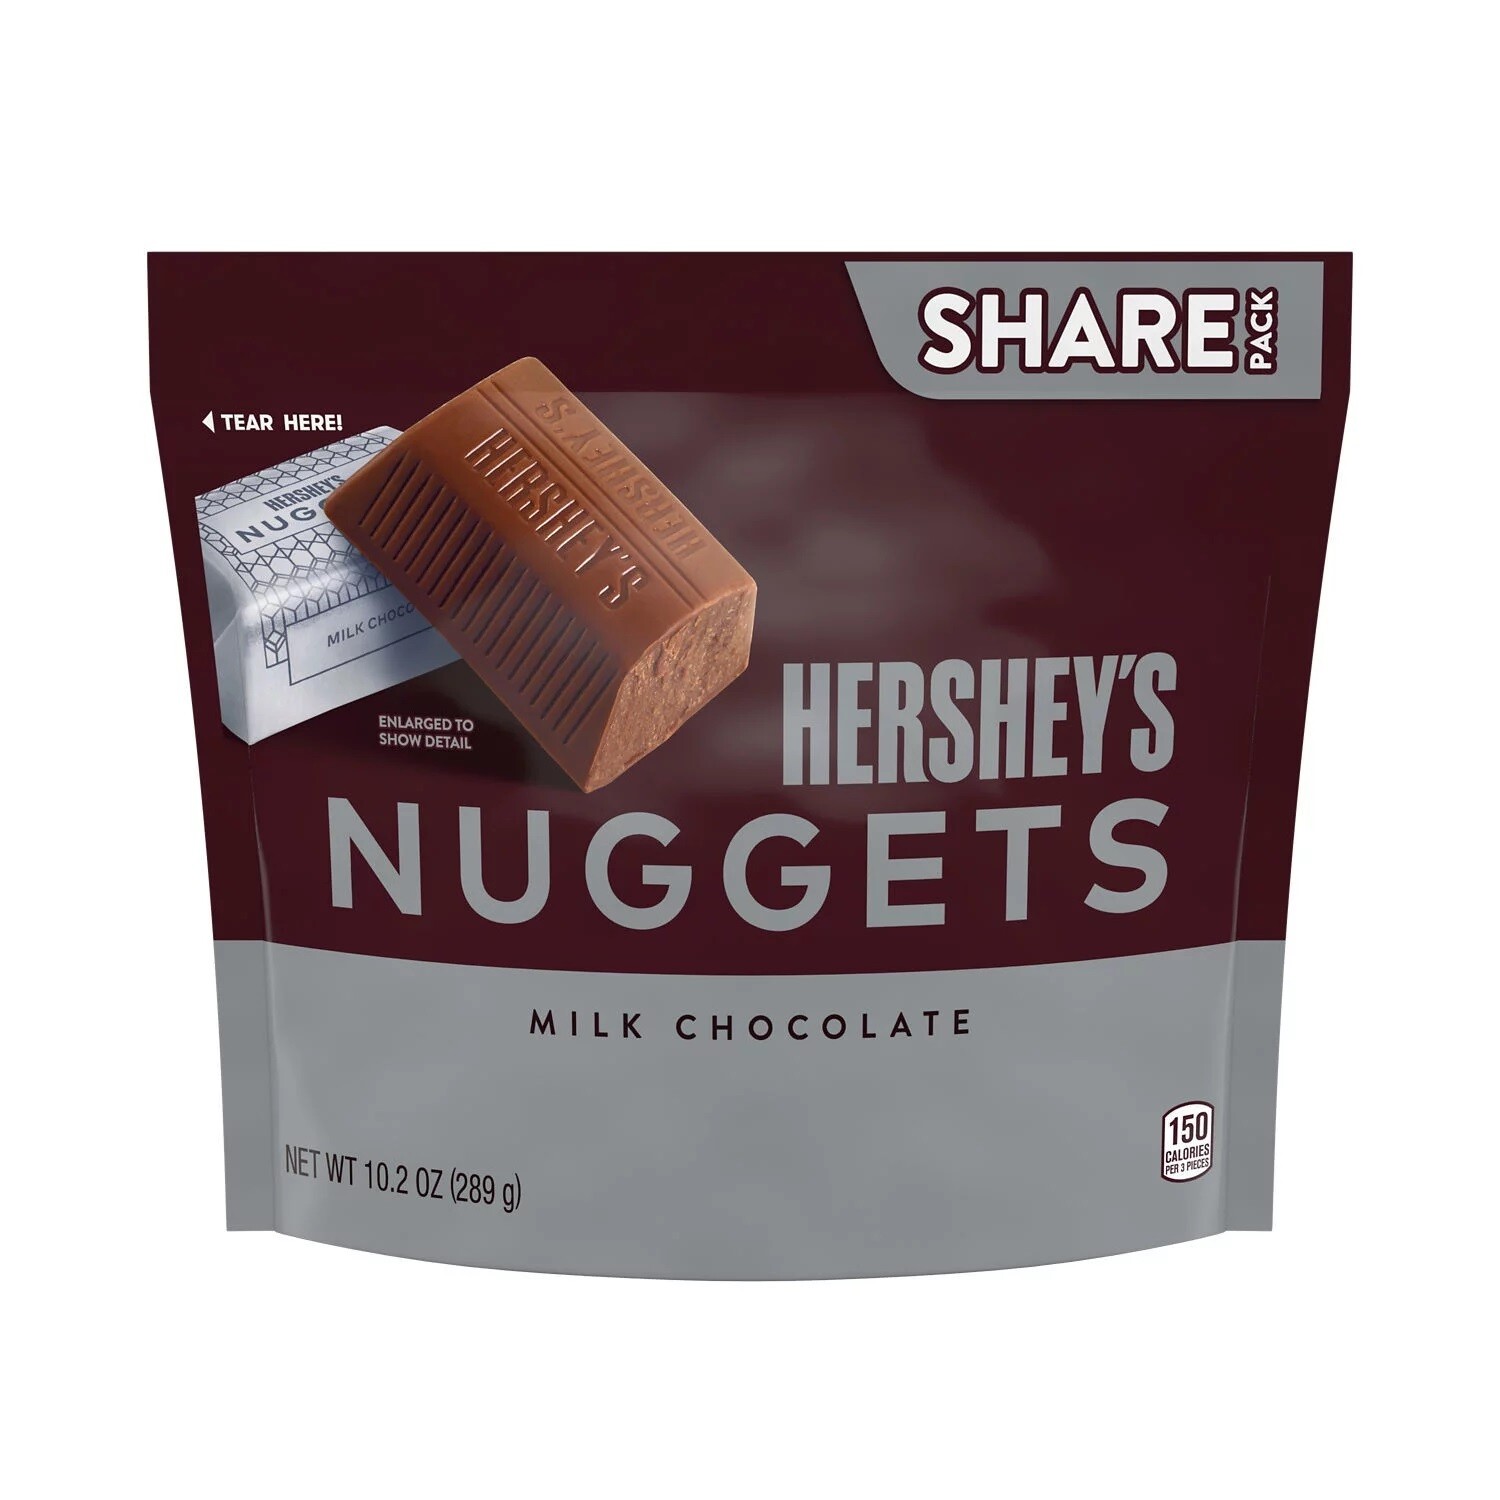 Share Pack    Hershey's Nuggets